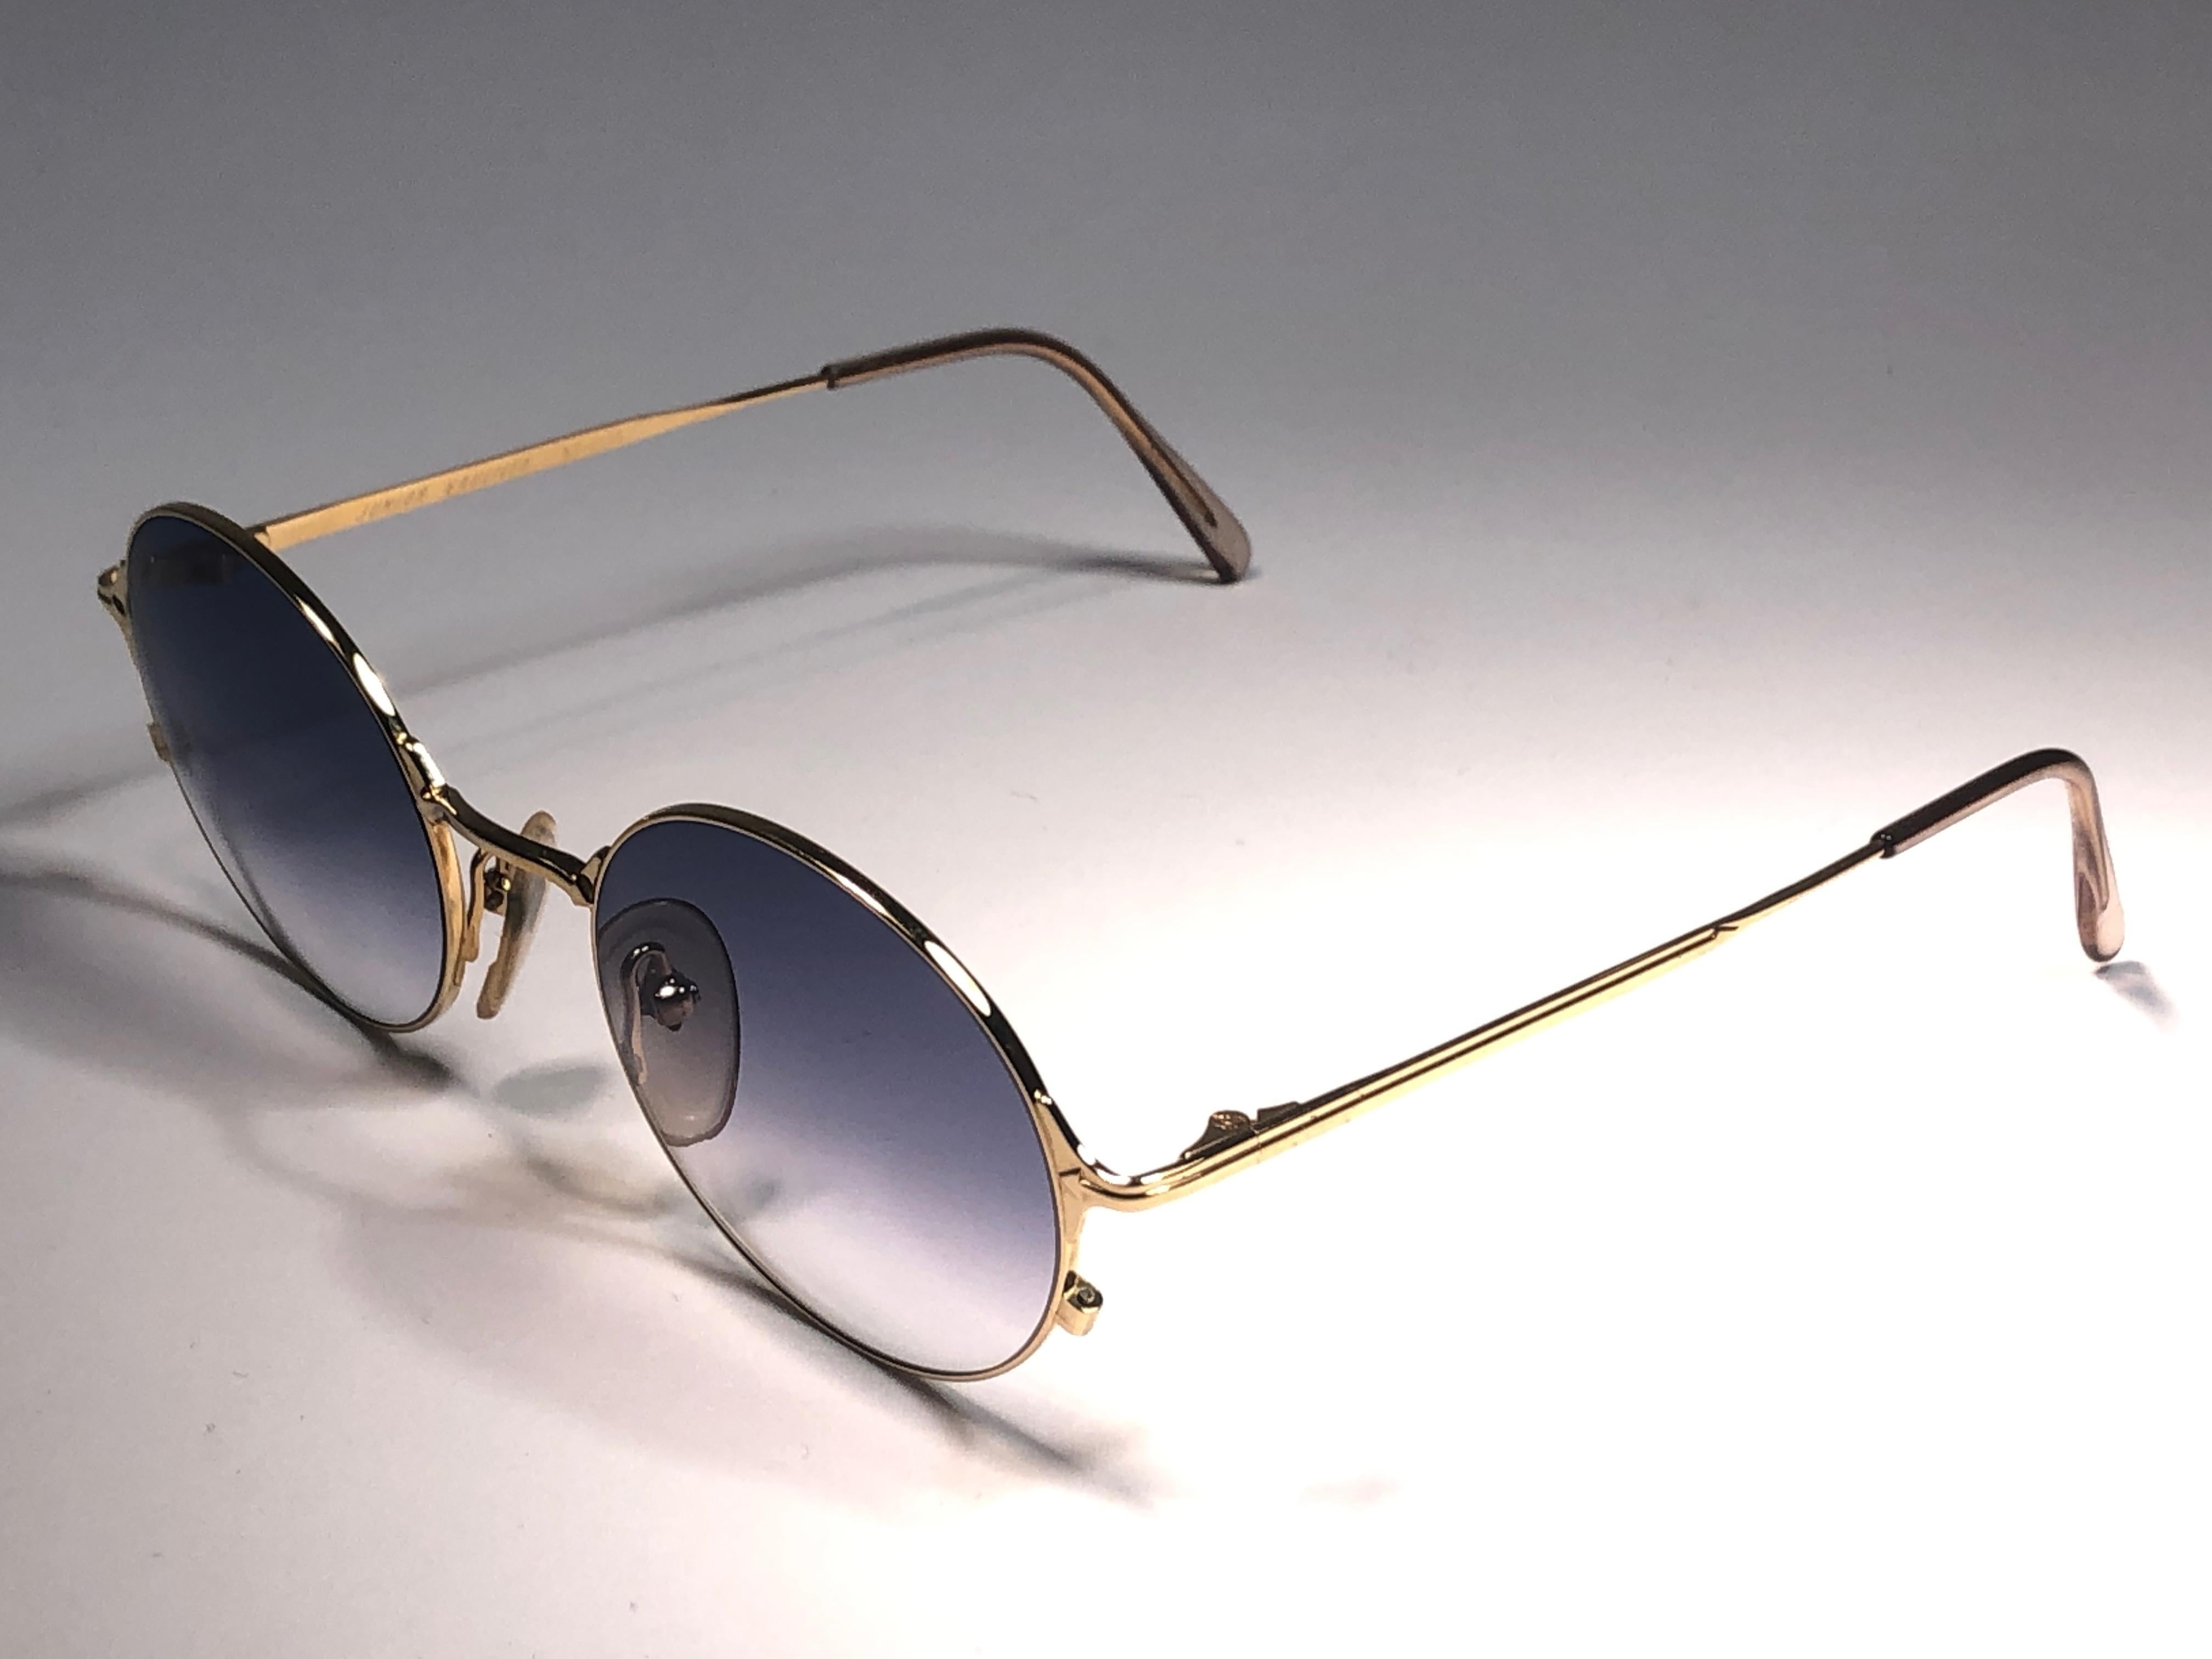 New Jean Paul Gaultier 57 2175 Oval Gold Sunglasses 1990's Made in ...